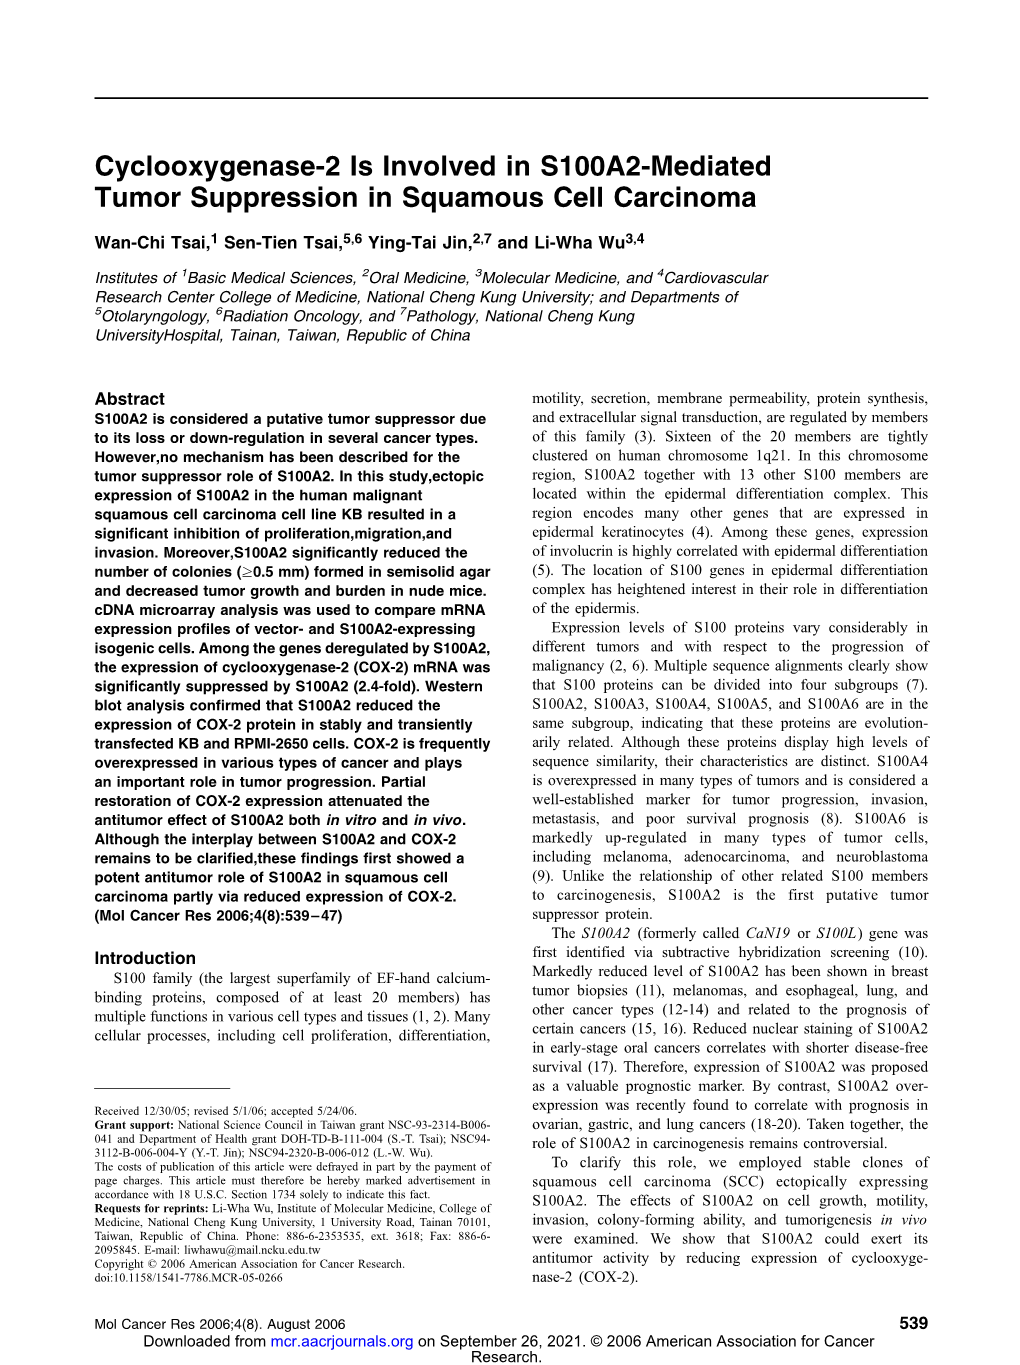 Cyclooxygenase-2 Is Involved in S100A2-Mediated Tumor Suppression in Squamous Cell Carcinoma